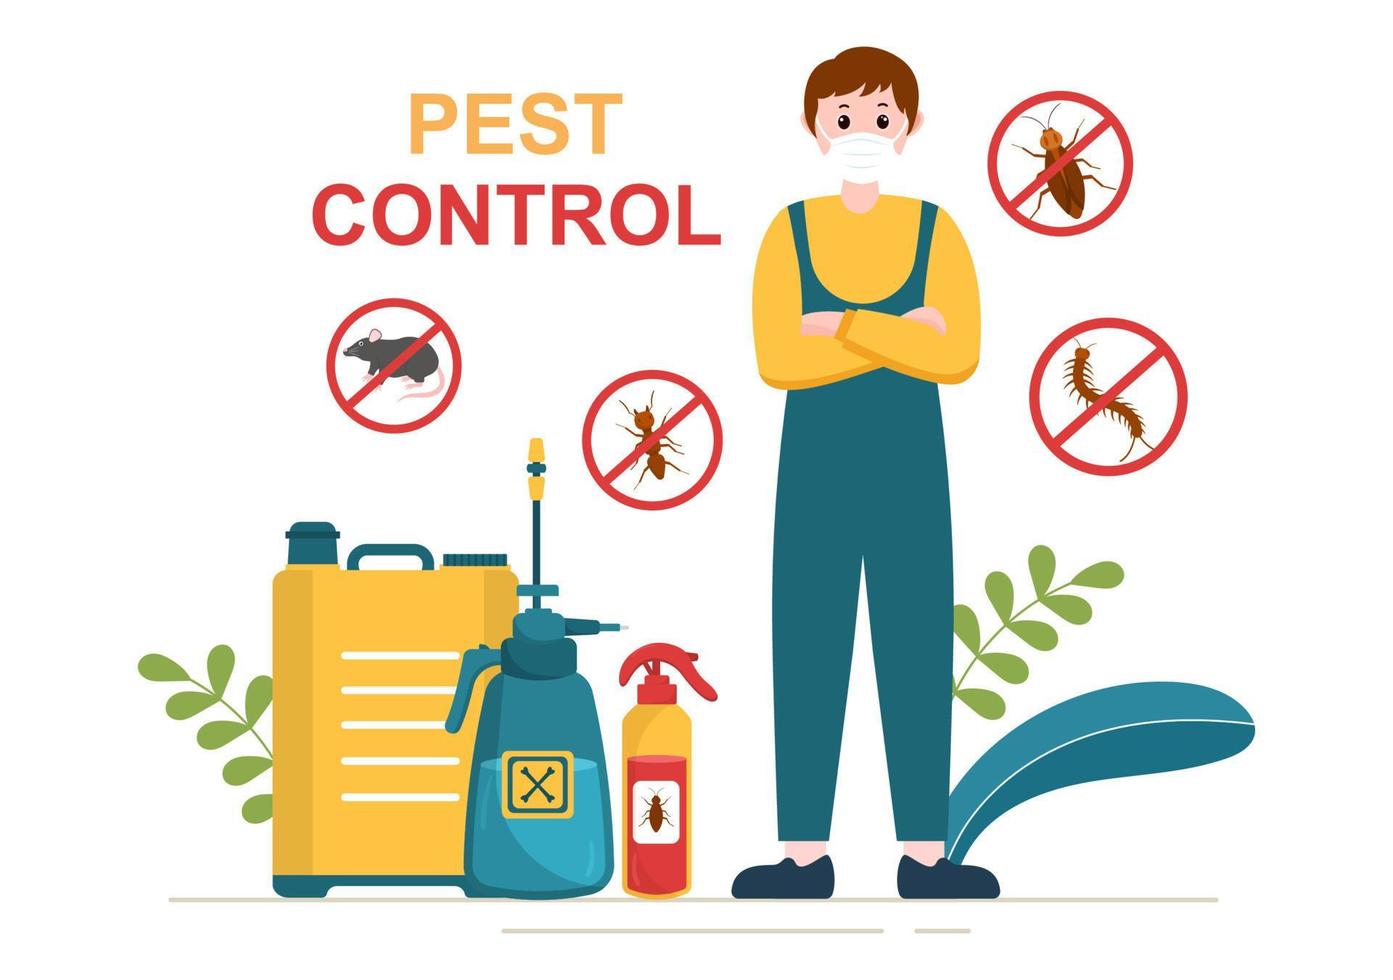 Pest Control Service with Exterminator of Insects, Sprays and House Hygiene Disinfection in Flat Cartoon Background Illustration vector